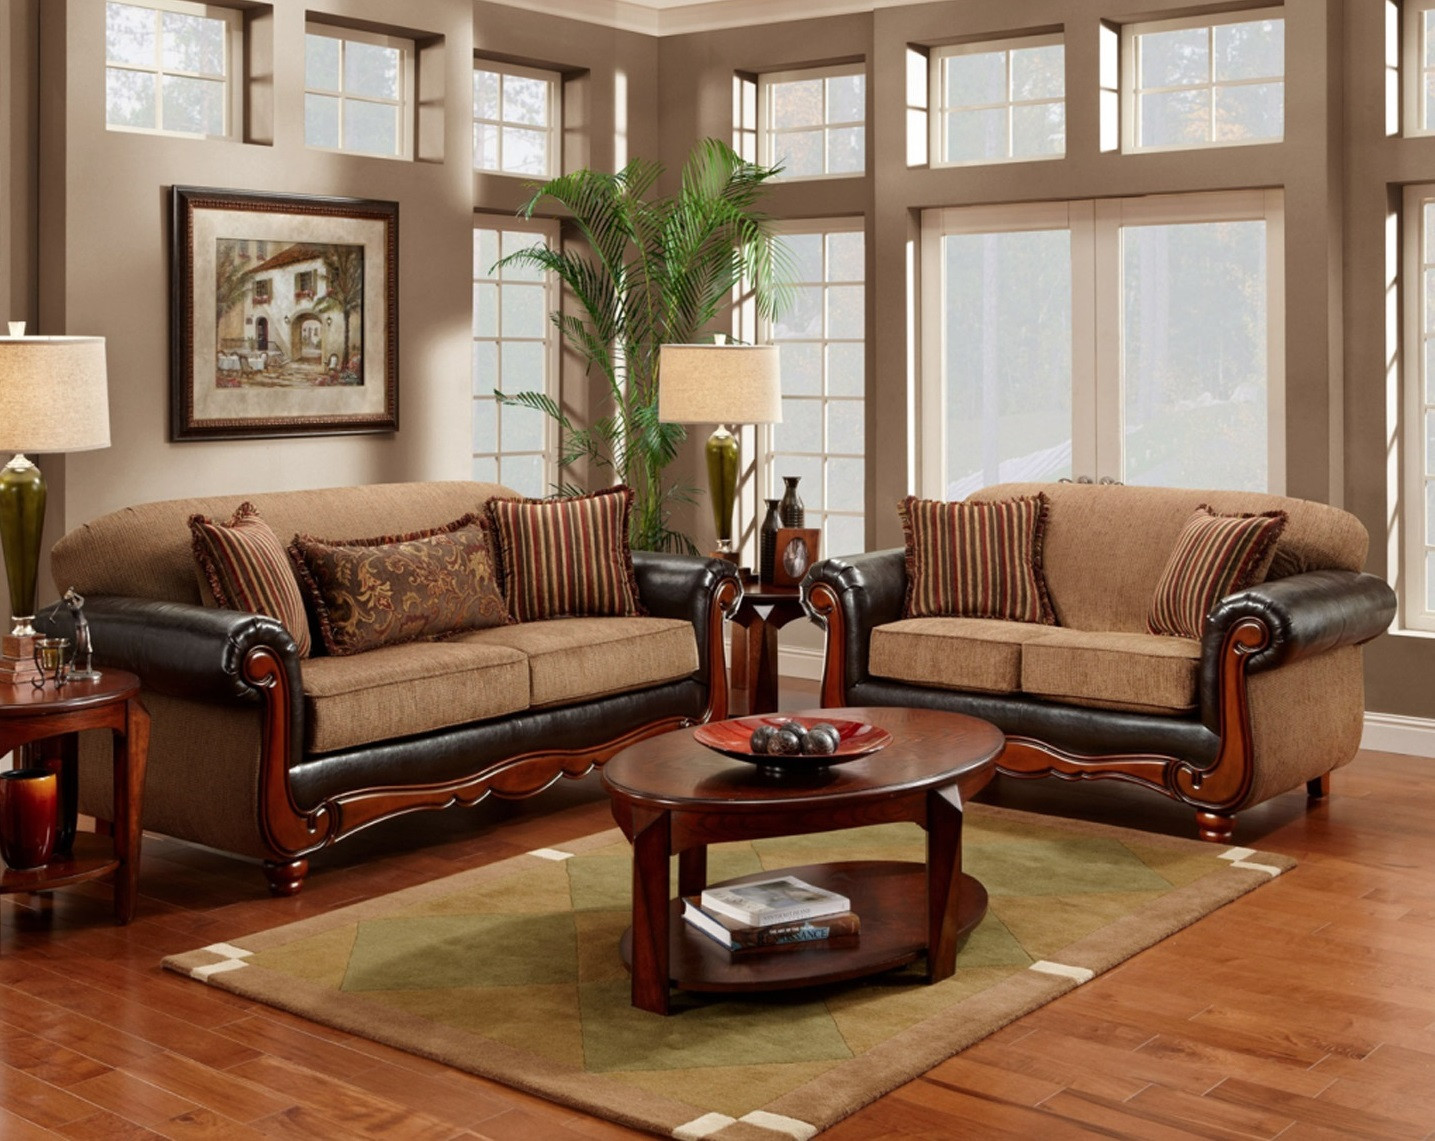 Furniture Ideas For Living Room
 Find Suitable Living Room Furniture With Your Style